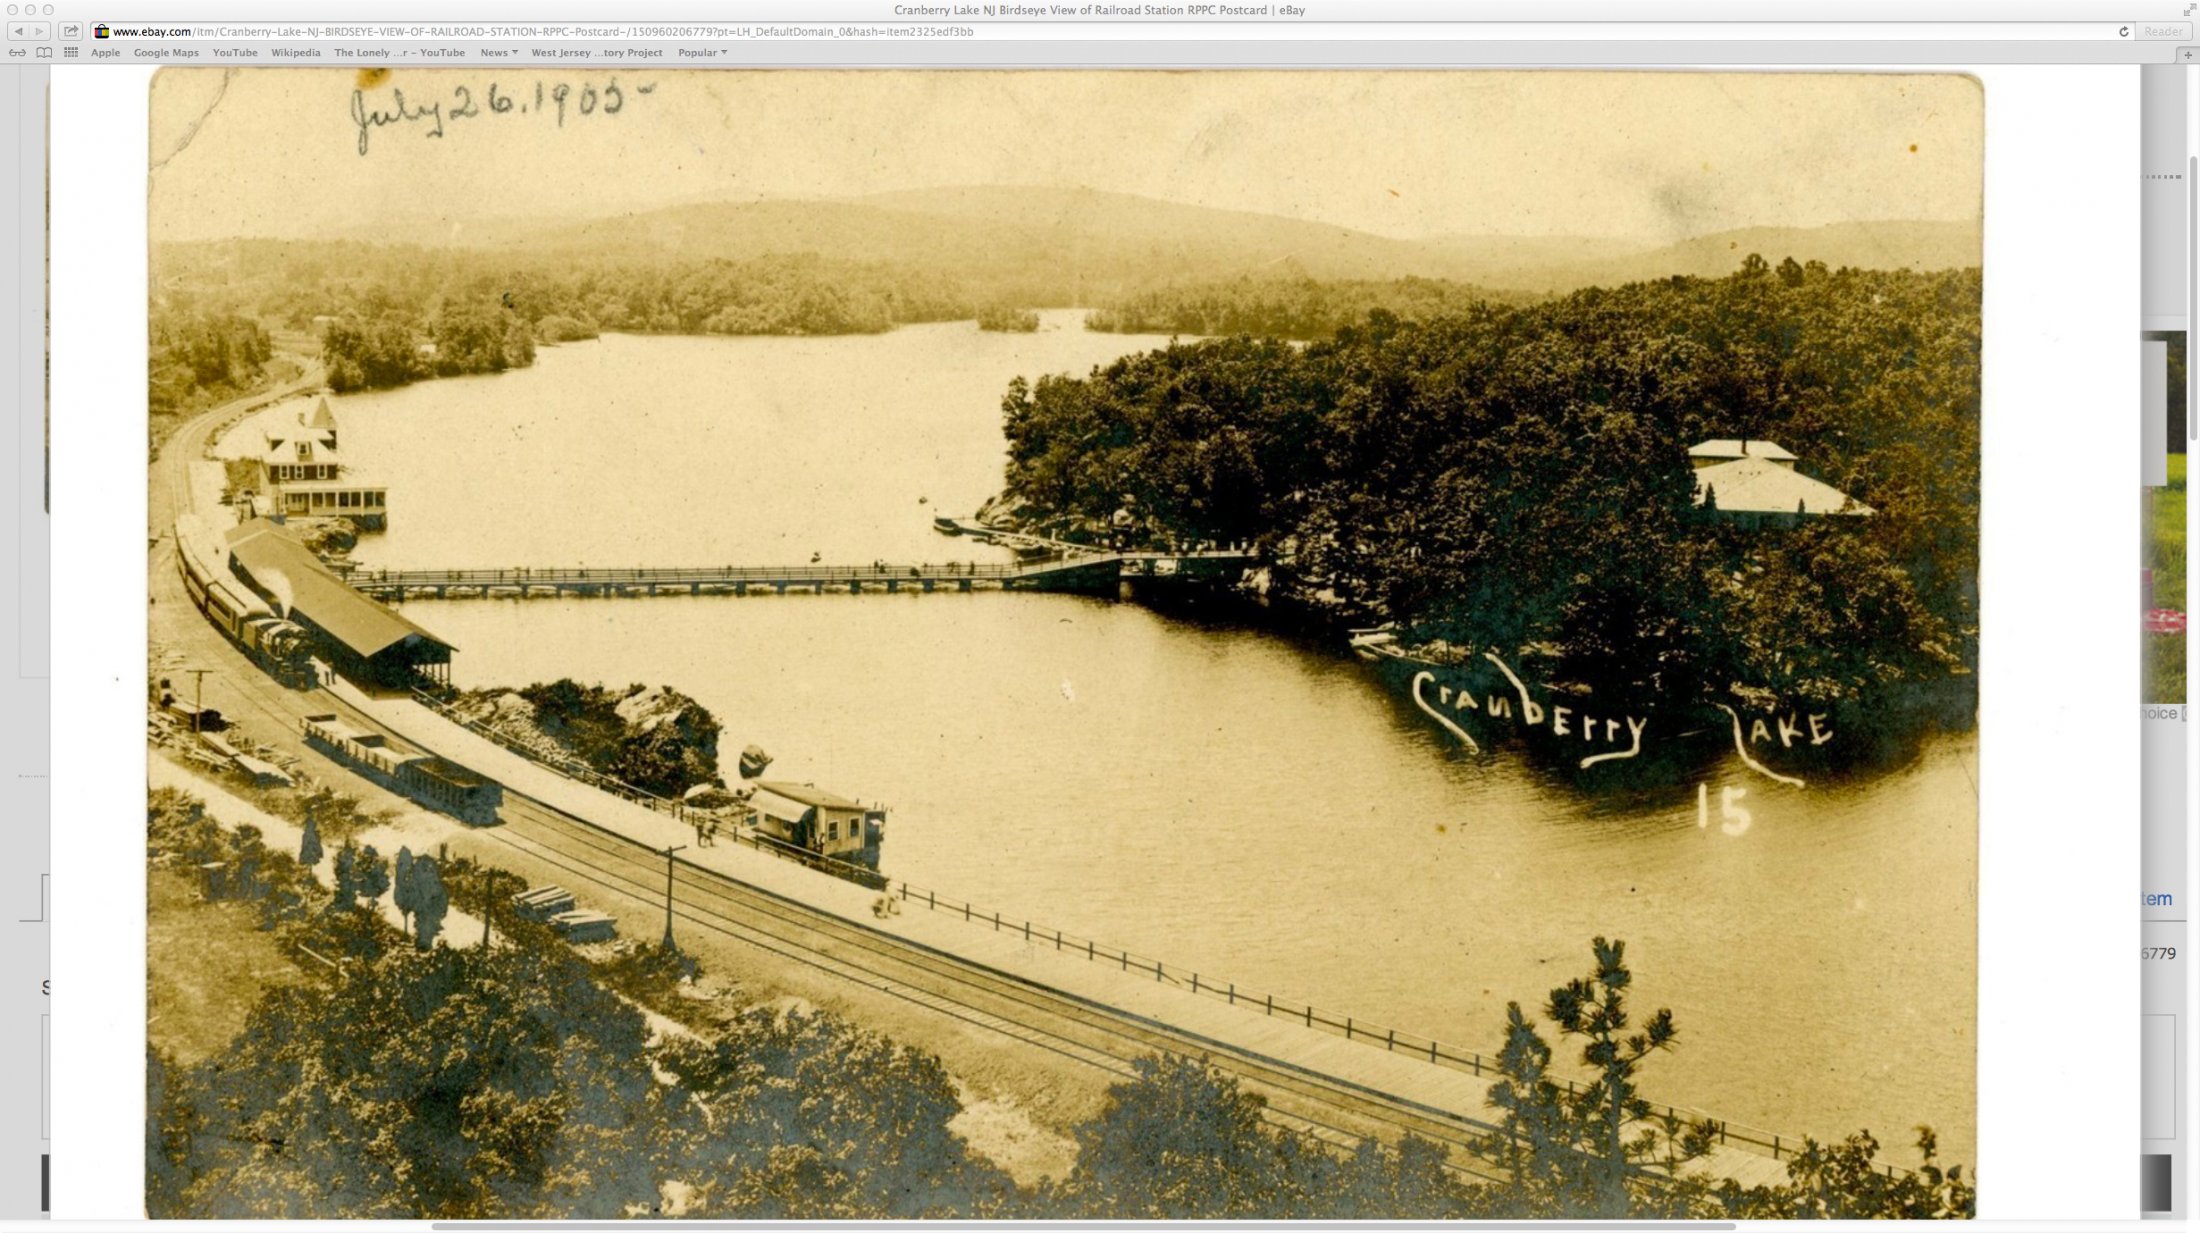 Cranberry Lake - Overview of RR Station - c 1910